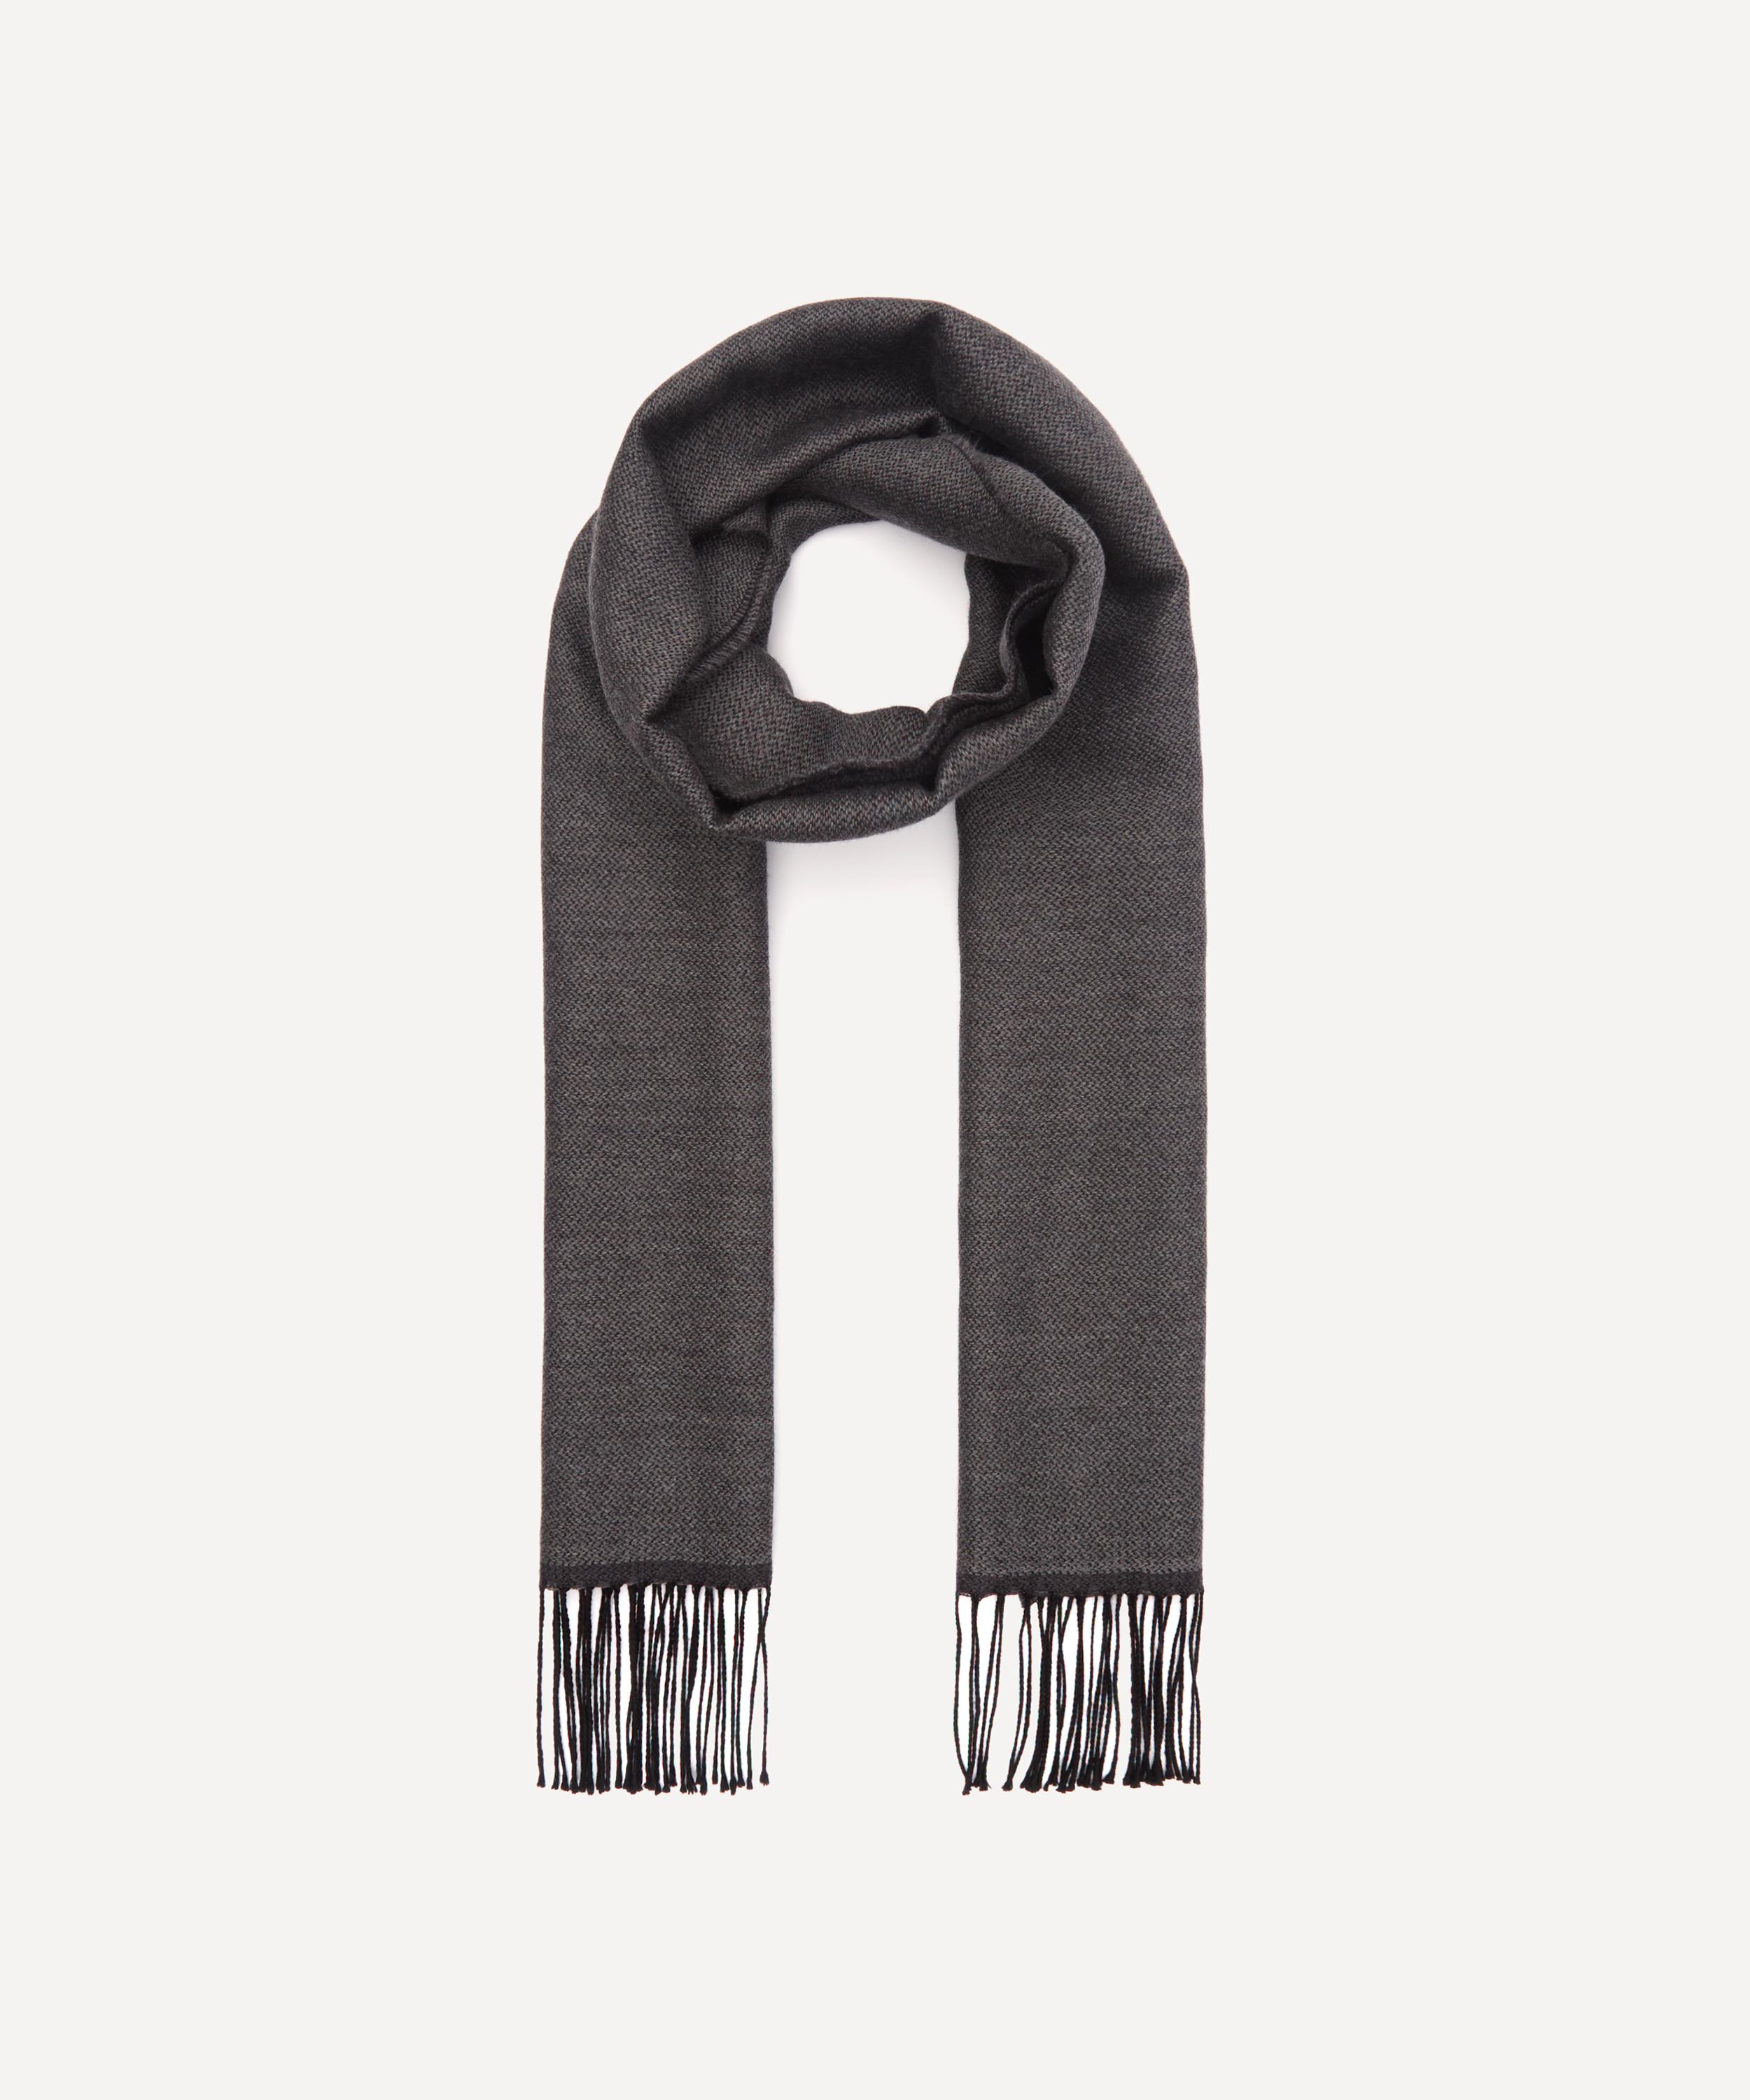 NICK BRONSON DOUBLE FACED WOOL SCARF,000708099